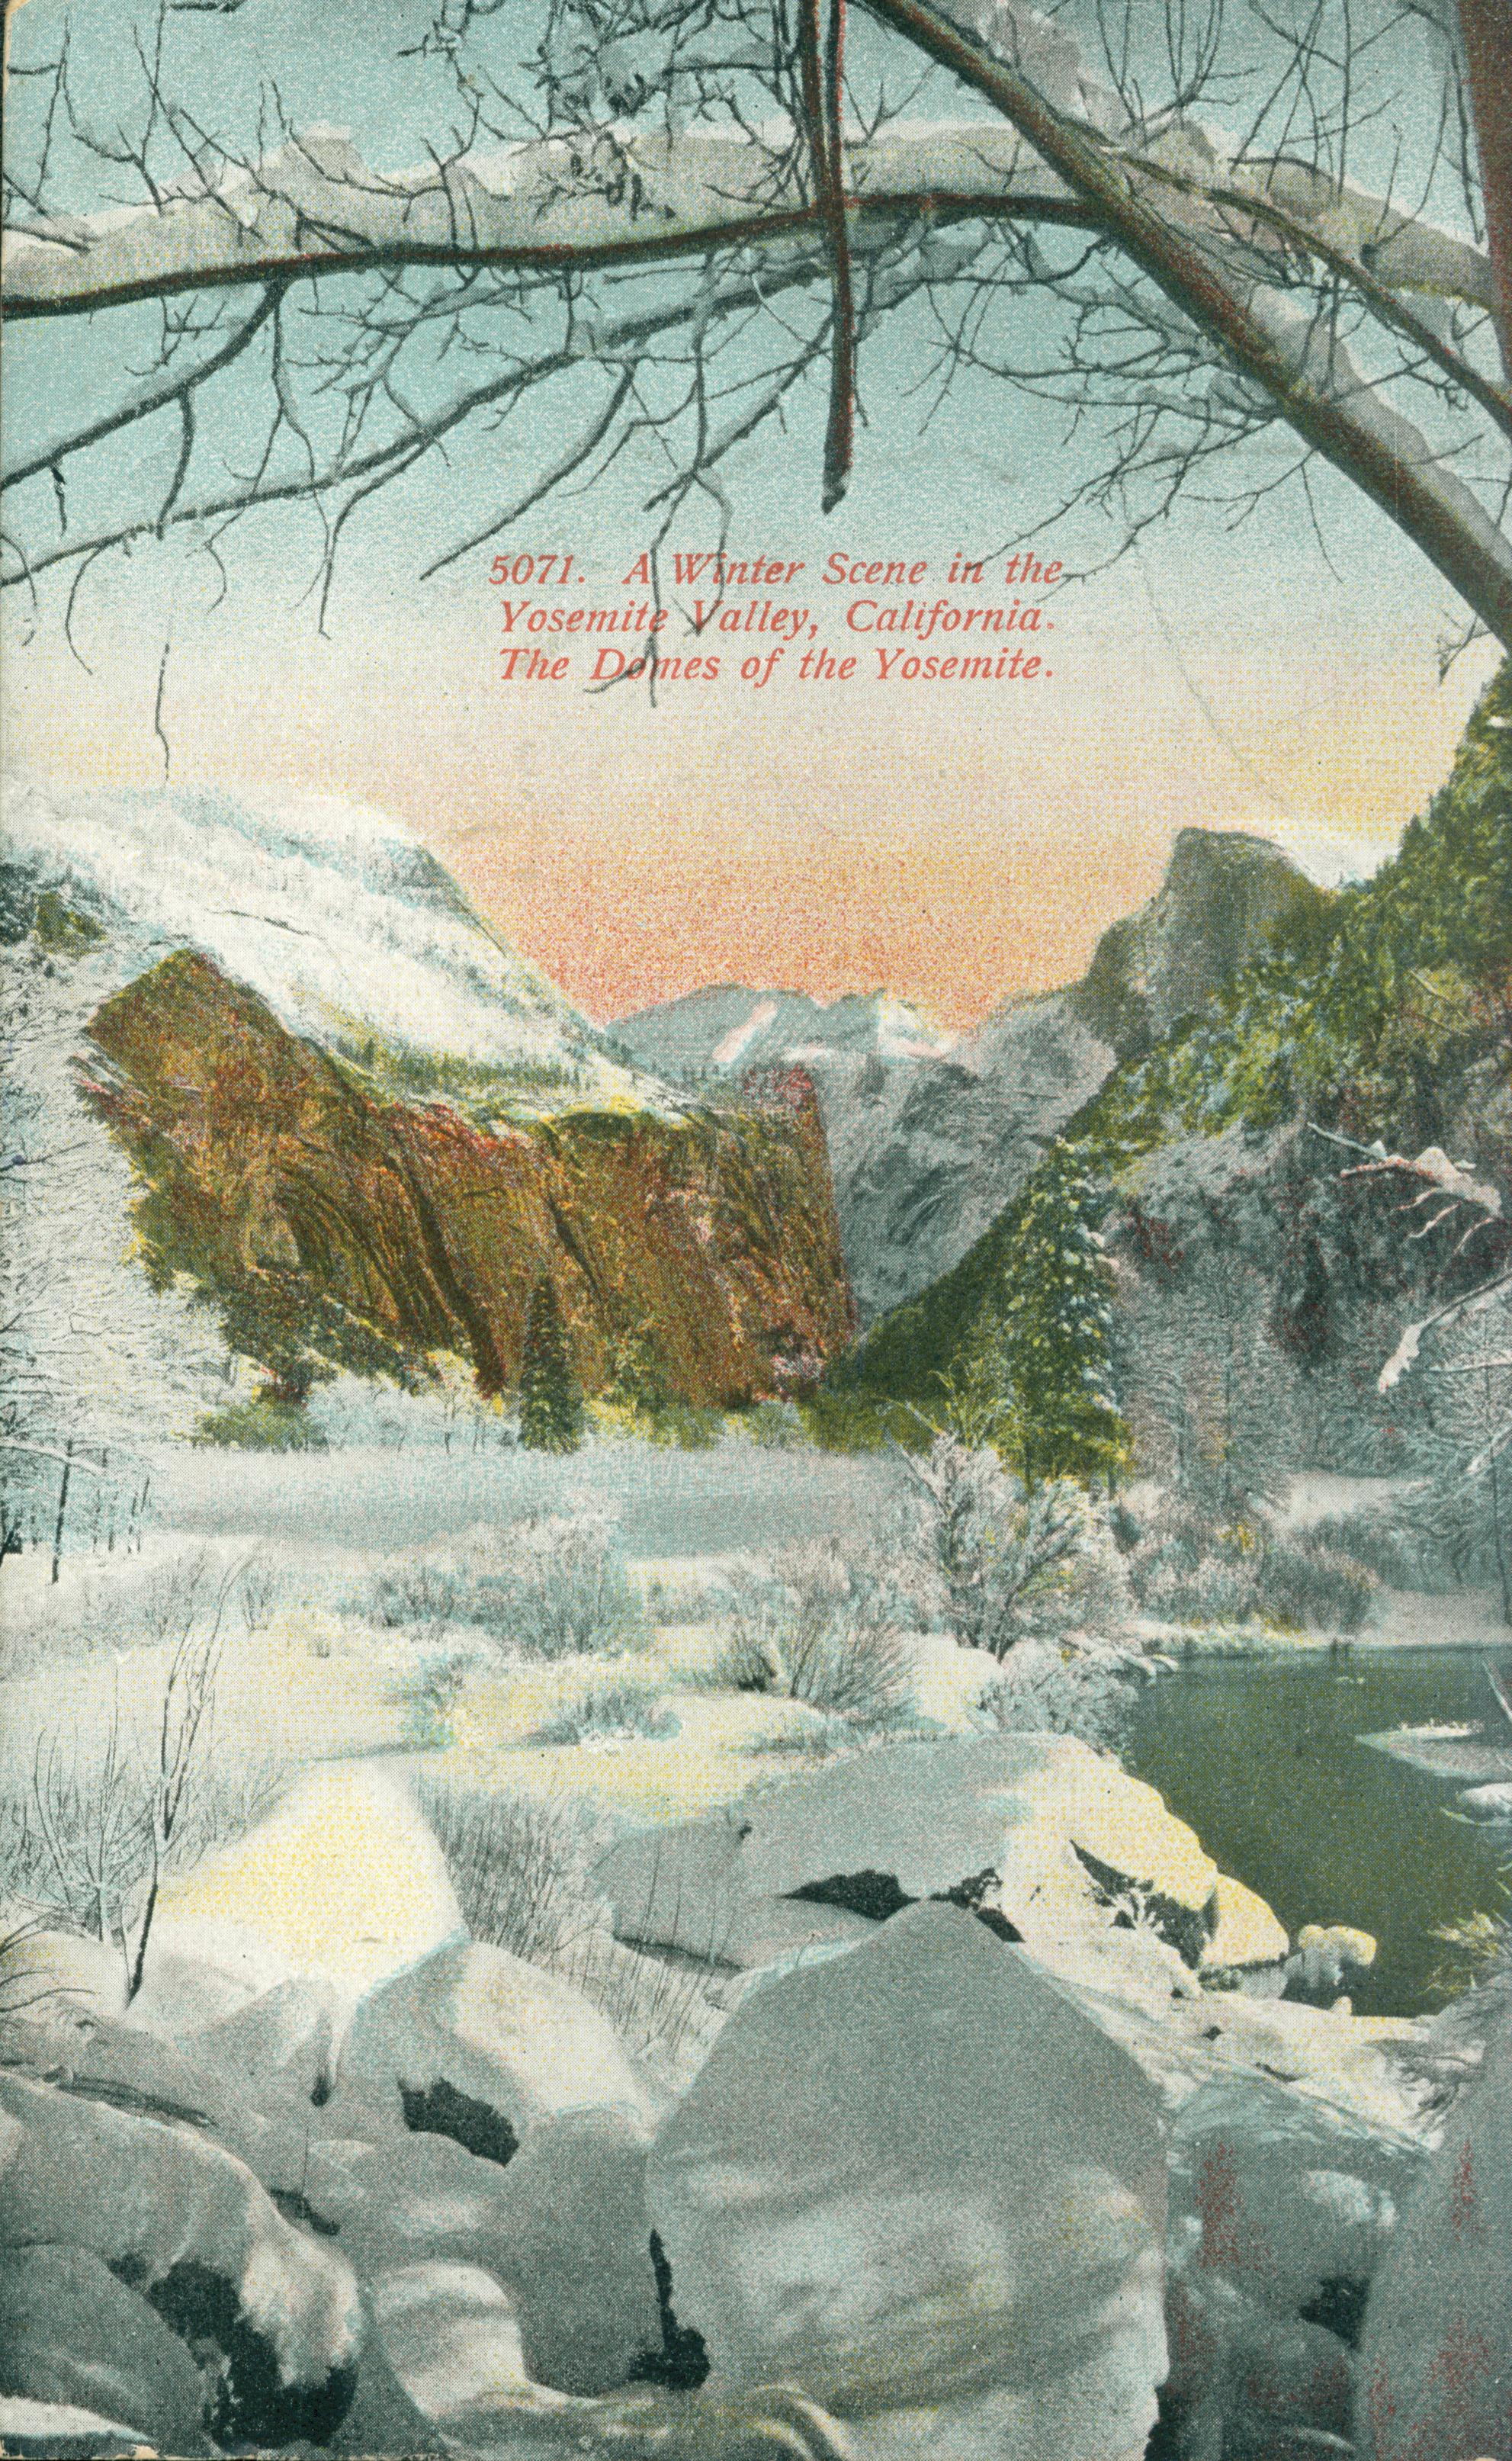 Shows a tree framed image of Yosemite Valley covered in snow with Half Dome and other rock formations in the background